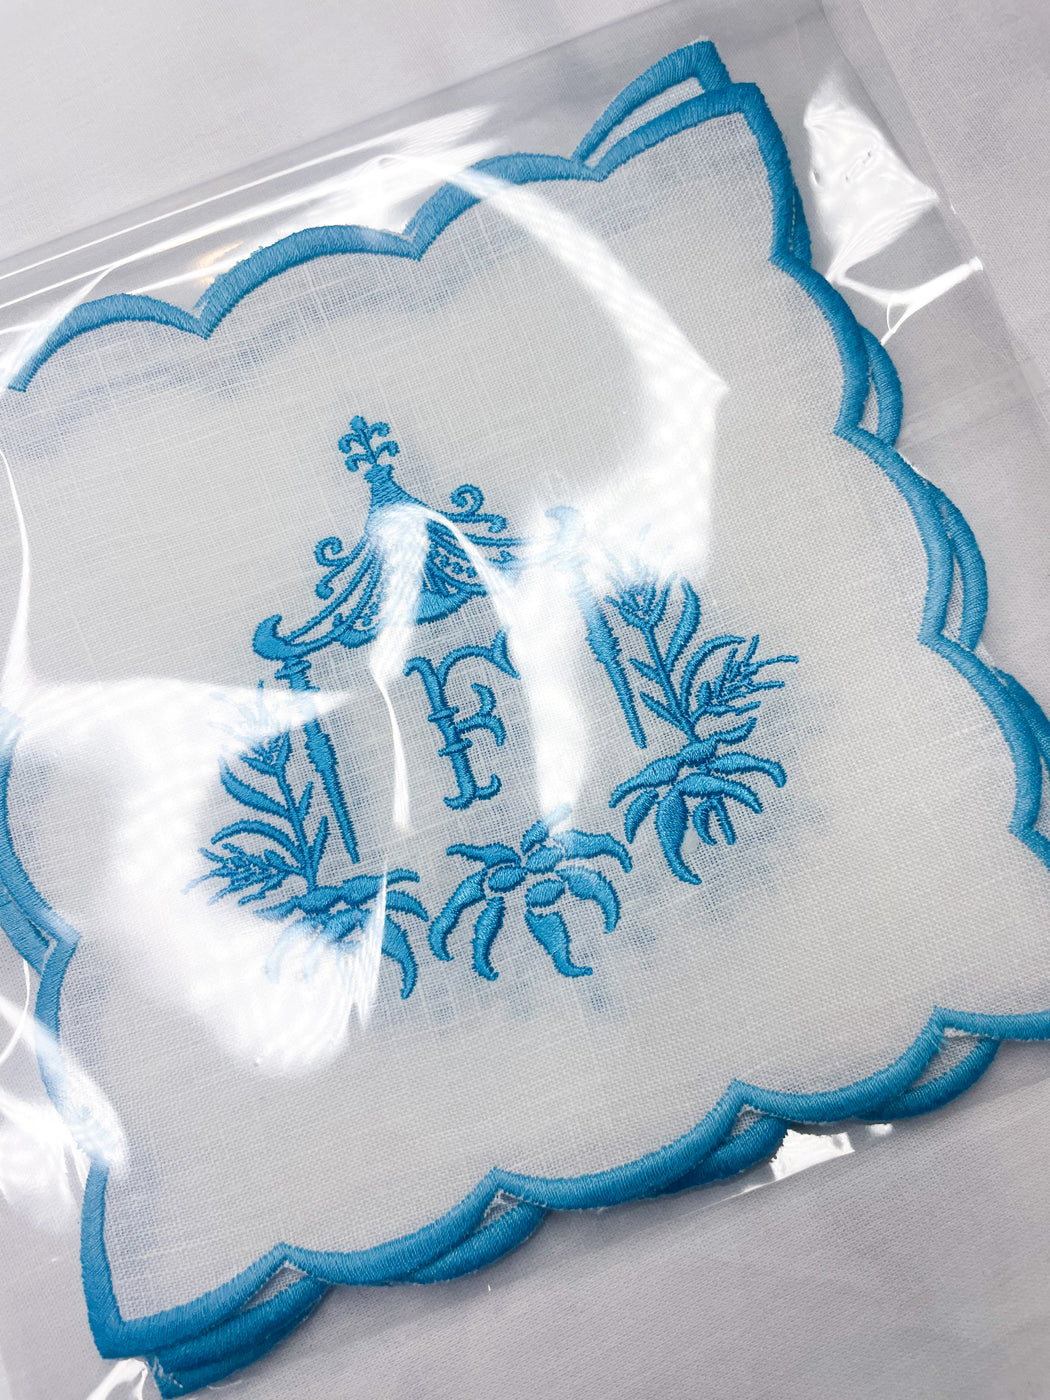 Scalloped Chinoiserie Blue Cocktail Napkins Coasters